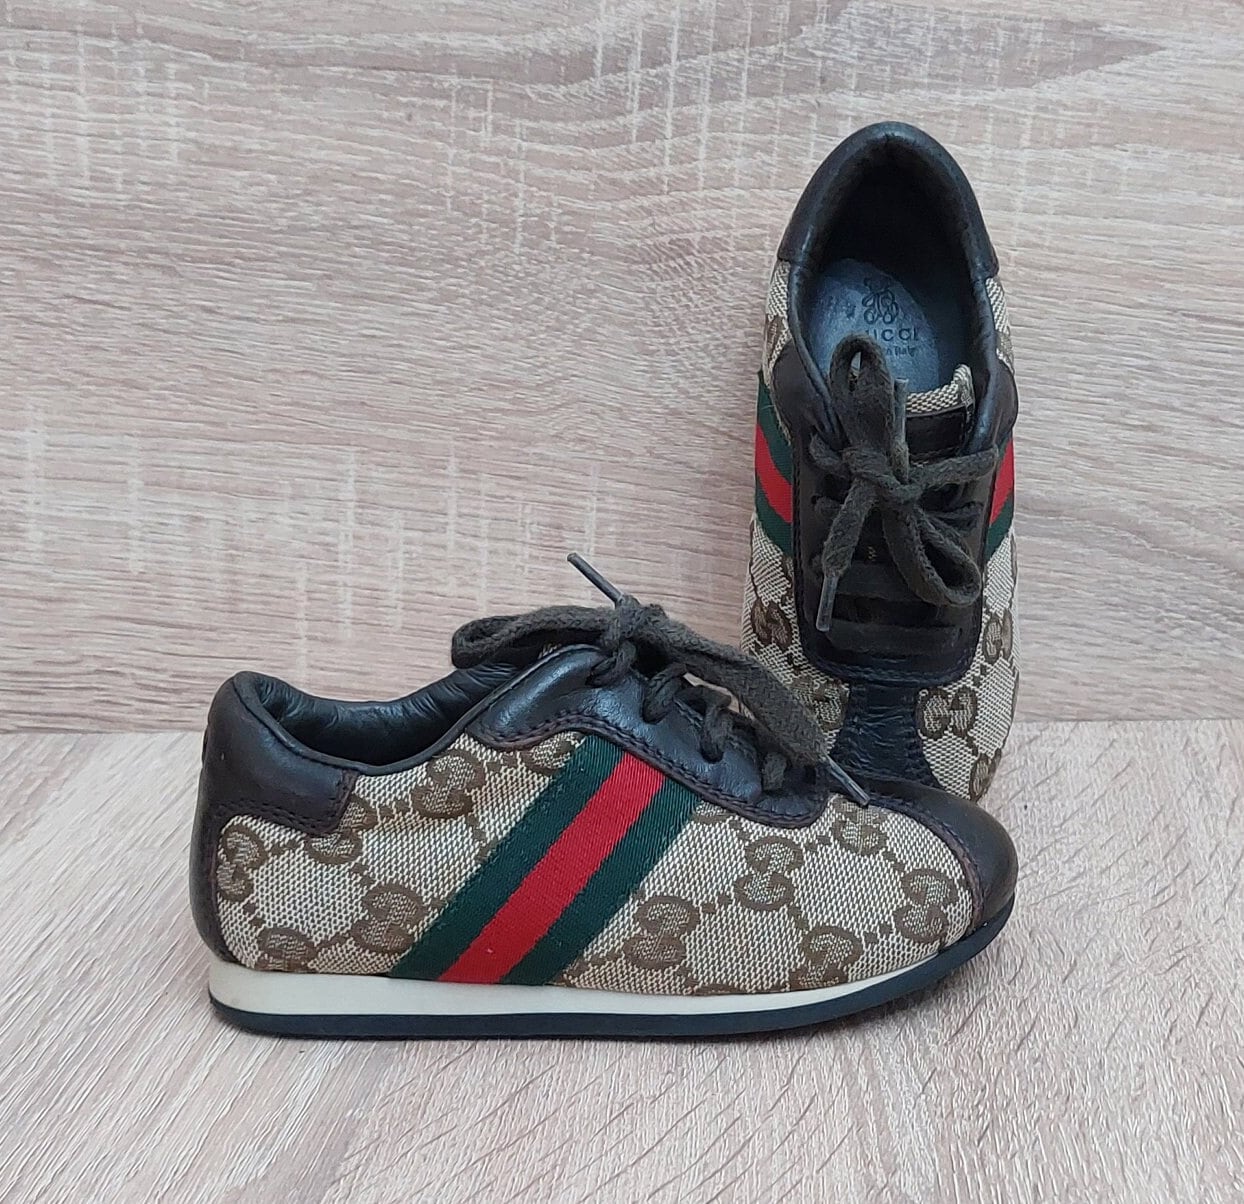 GUCCI Dublin GG Embossed Leather Black Italy Skate Shoes Slip On Sneakers  7.5